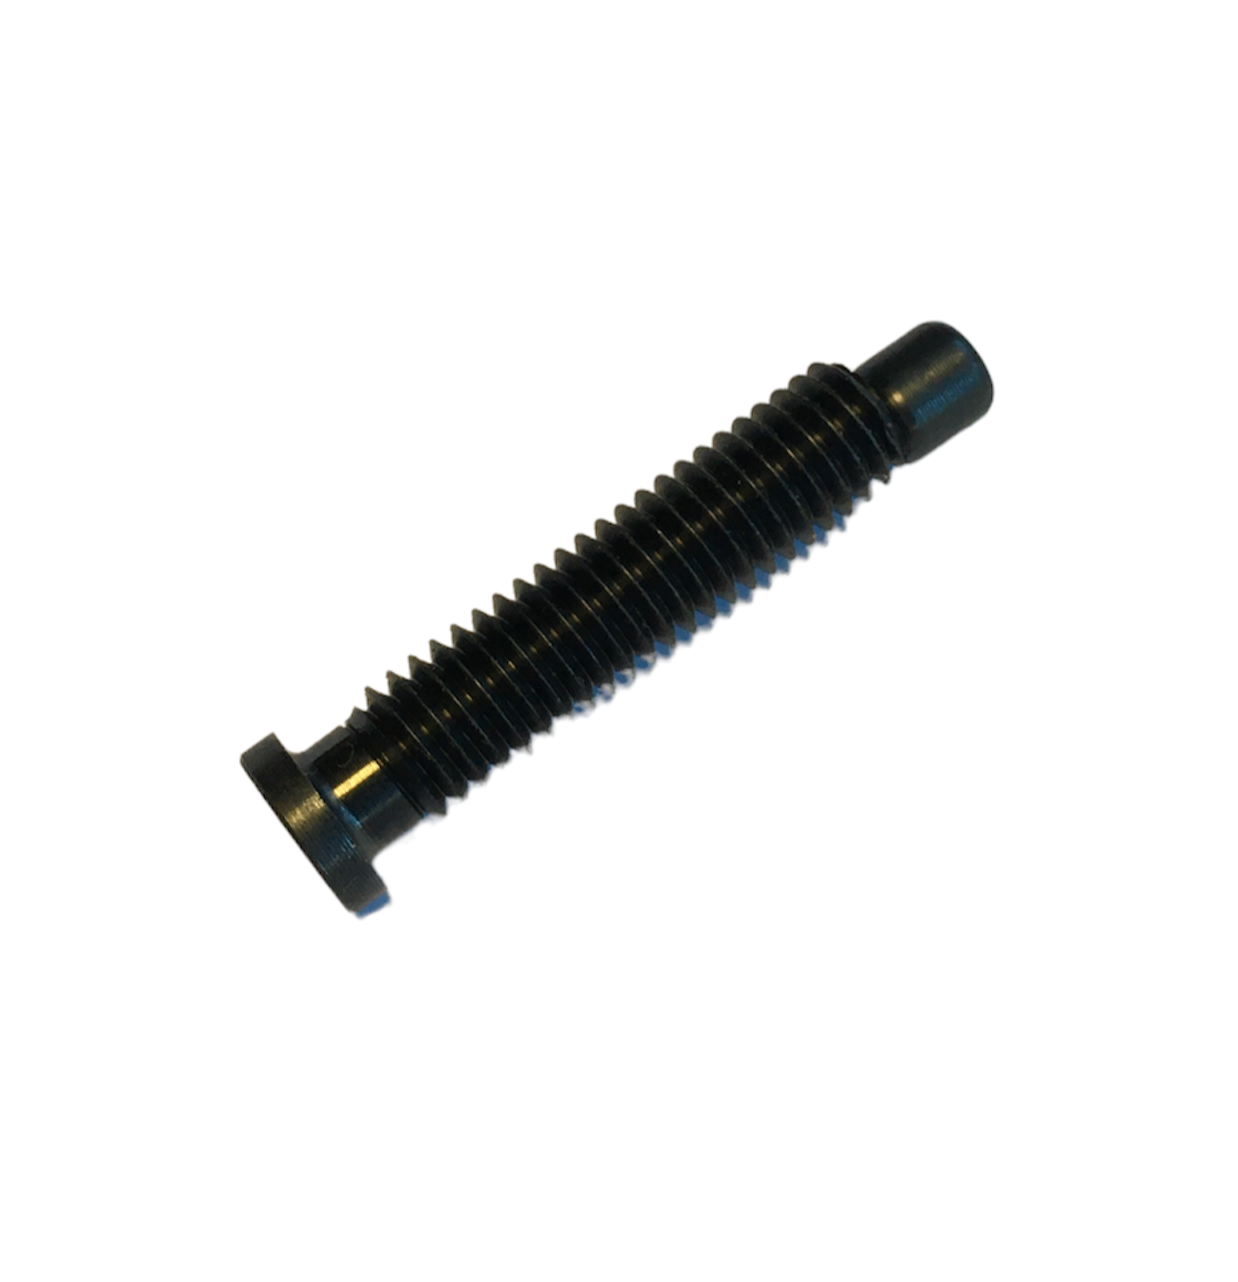 Tiberius Arms Tool-less CO2 Screw Assembly